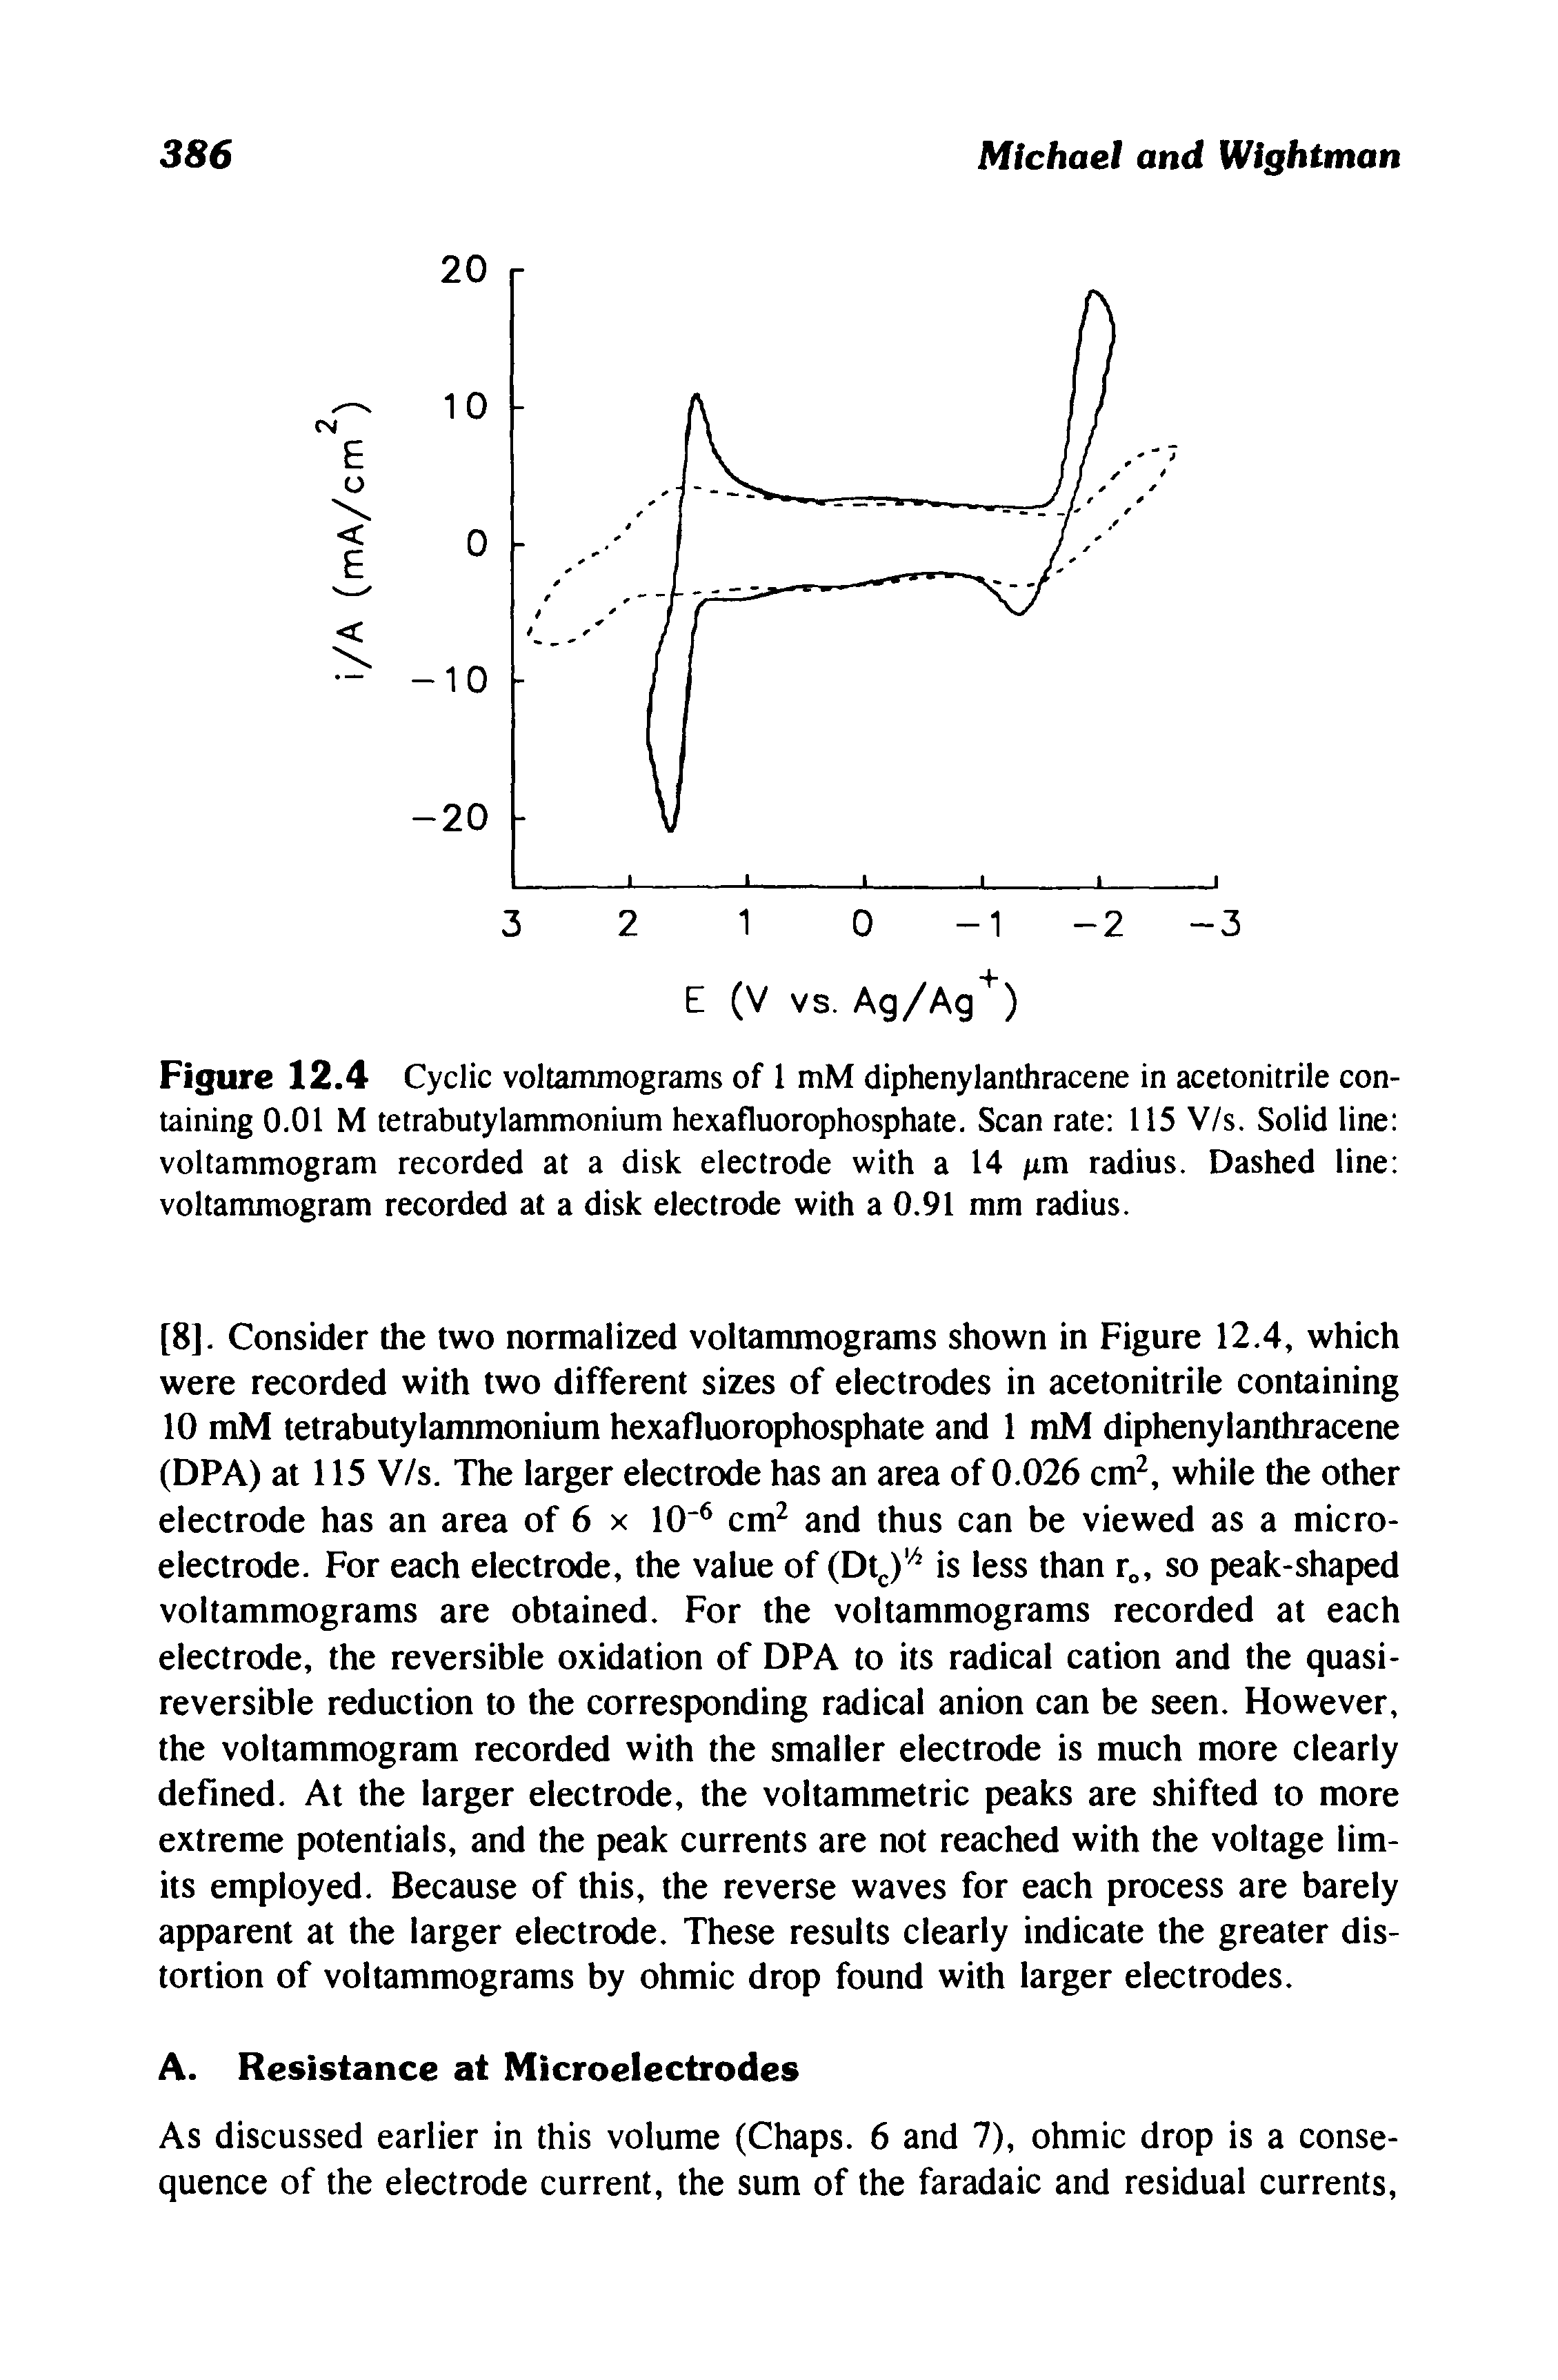 Figure 12.4 Cyclic voltammograms of 1 mM diphenylanthracene in acetonitrile containing 0.01 M tetrabutylammonium hexafluorophosphate. Scan rate 115 V/s. Solid line voltammogram recorded at a disk electrode with a 14 /xm radius. Dashed line voltammogram recorded at a disk electrode with a 0.91 mm radius.